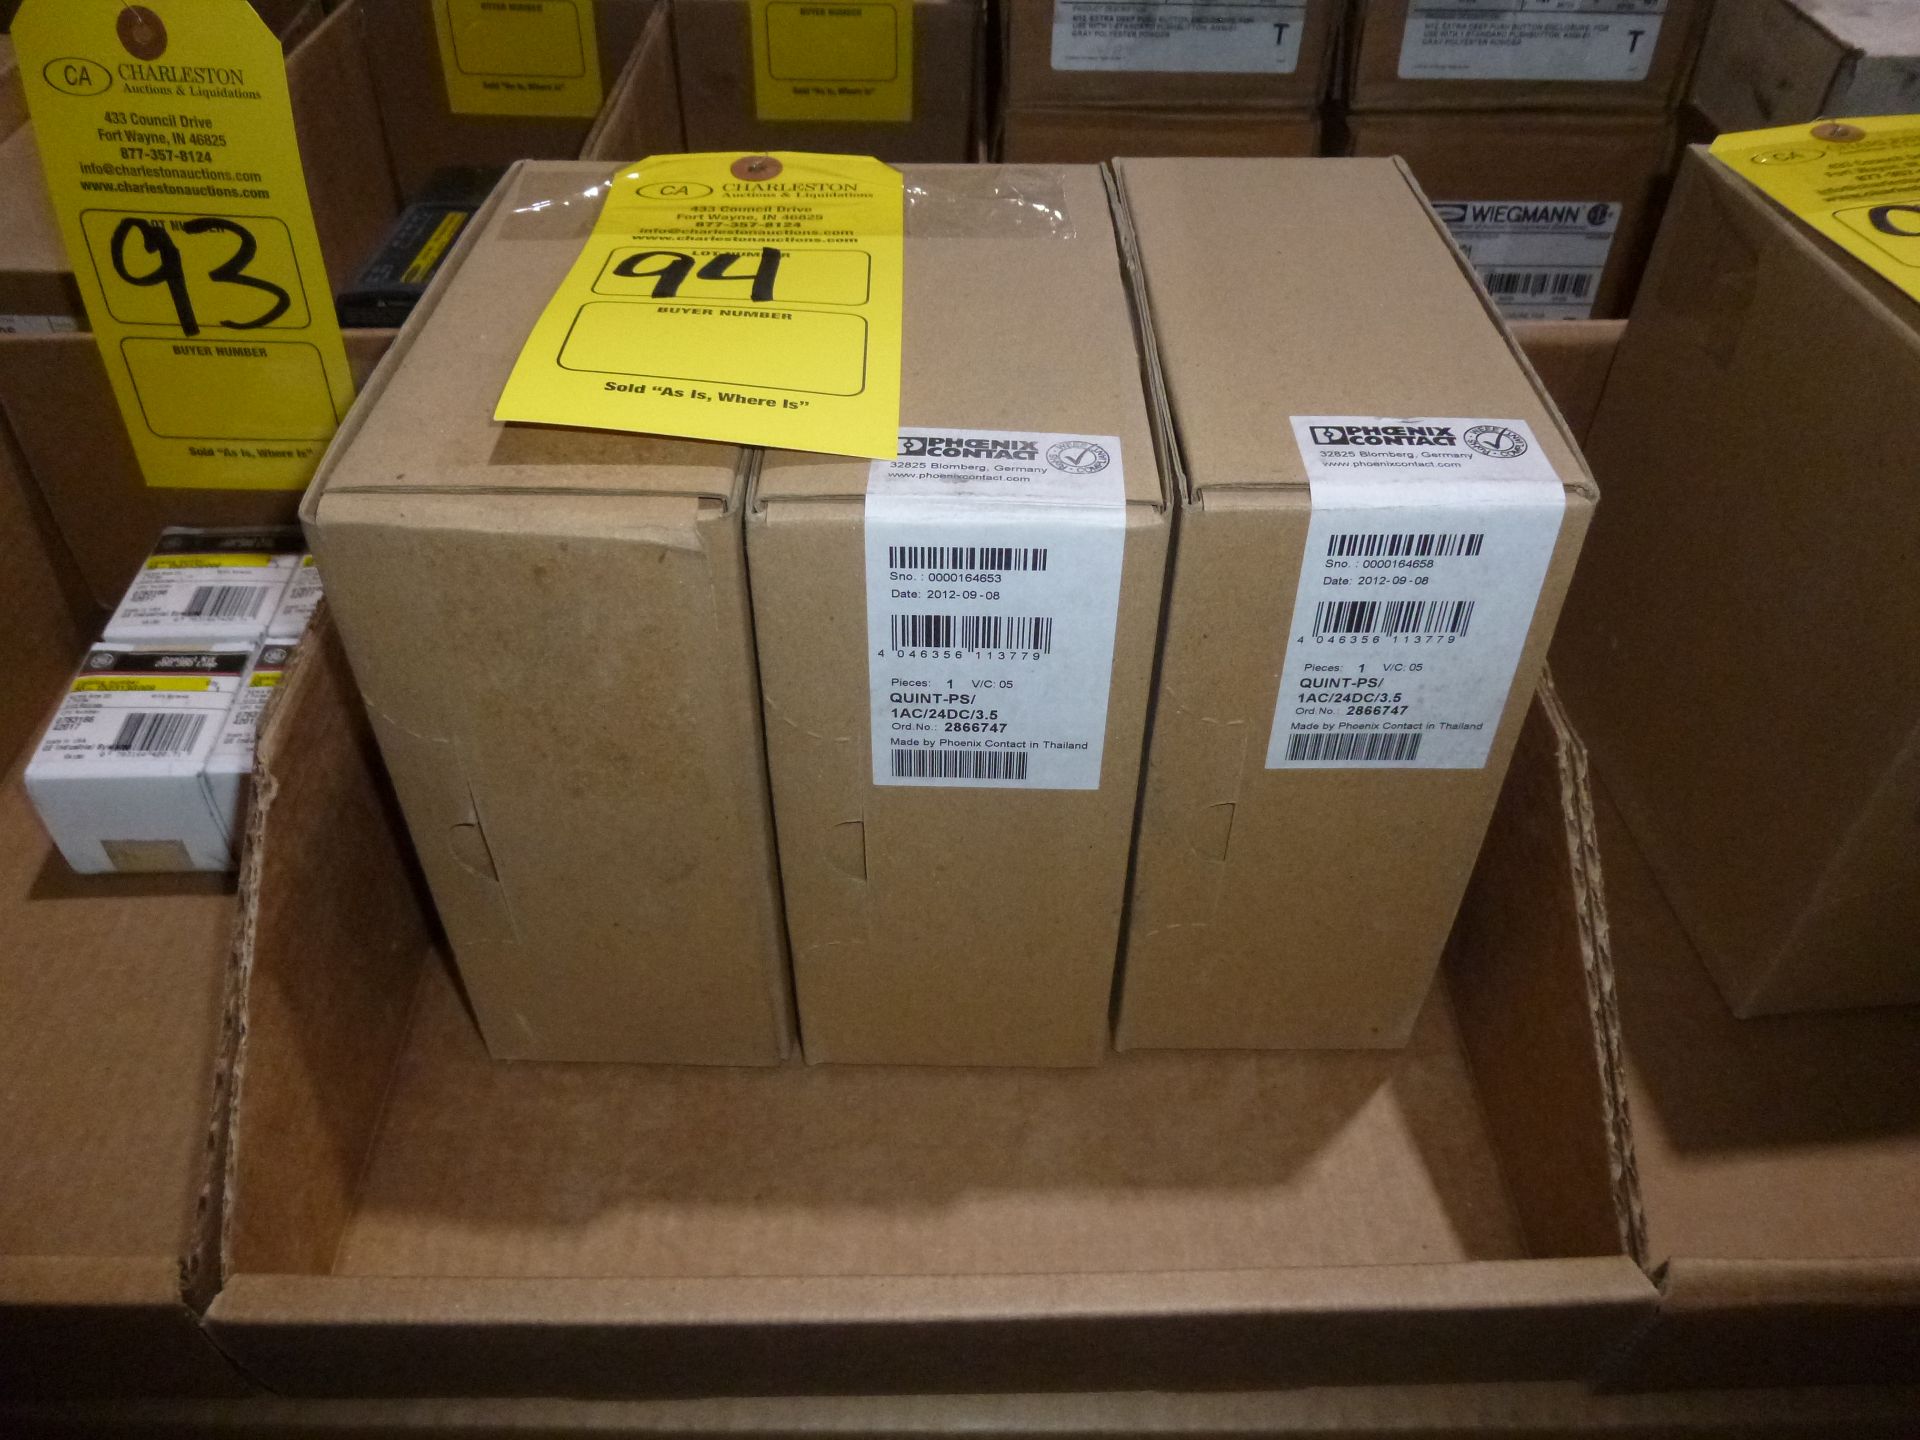 Qty 3 Phoenix Contact Power Supplies Model 1AC/24DC/3.5 new in boxes, as always with Brolyn LLC